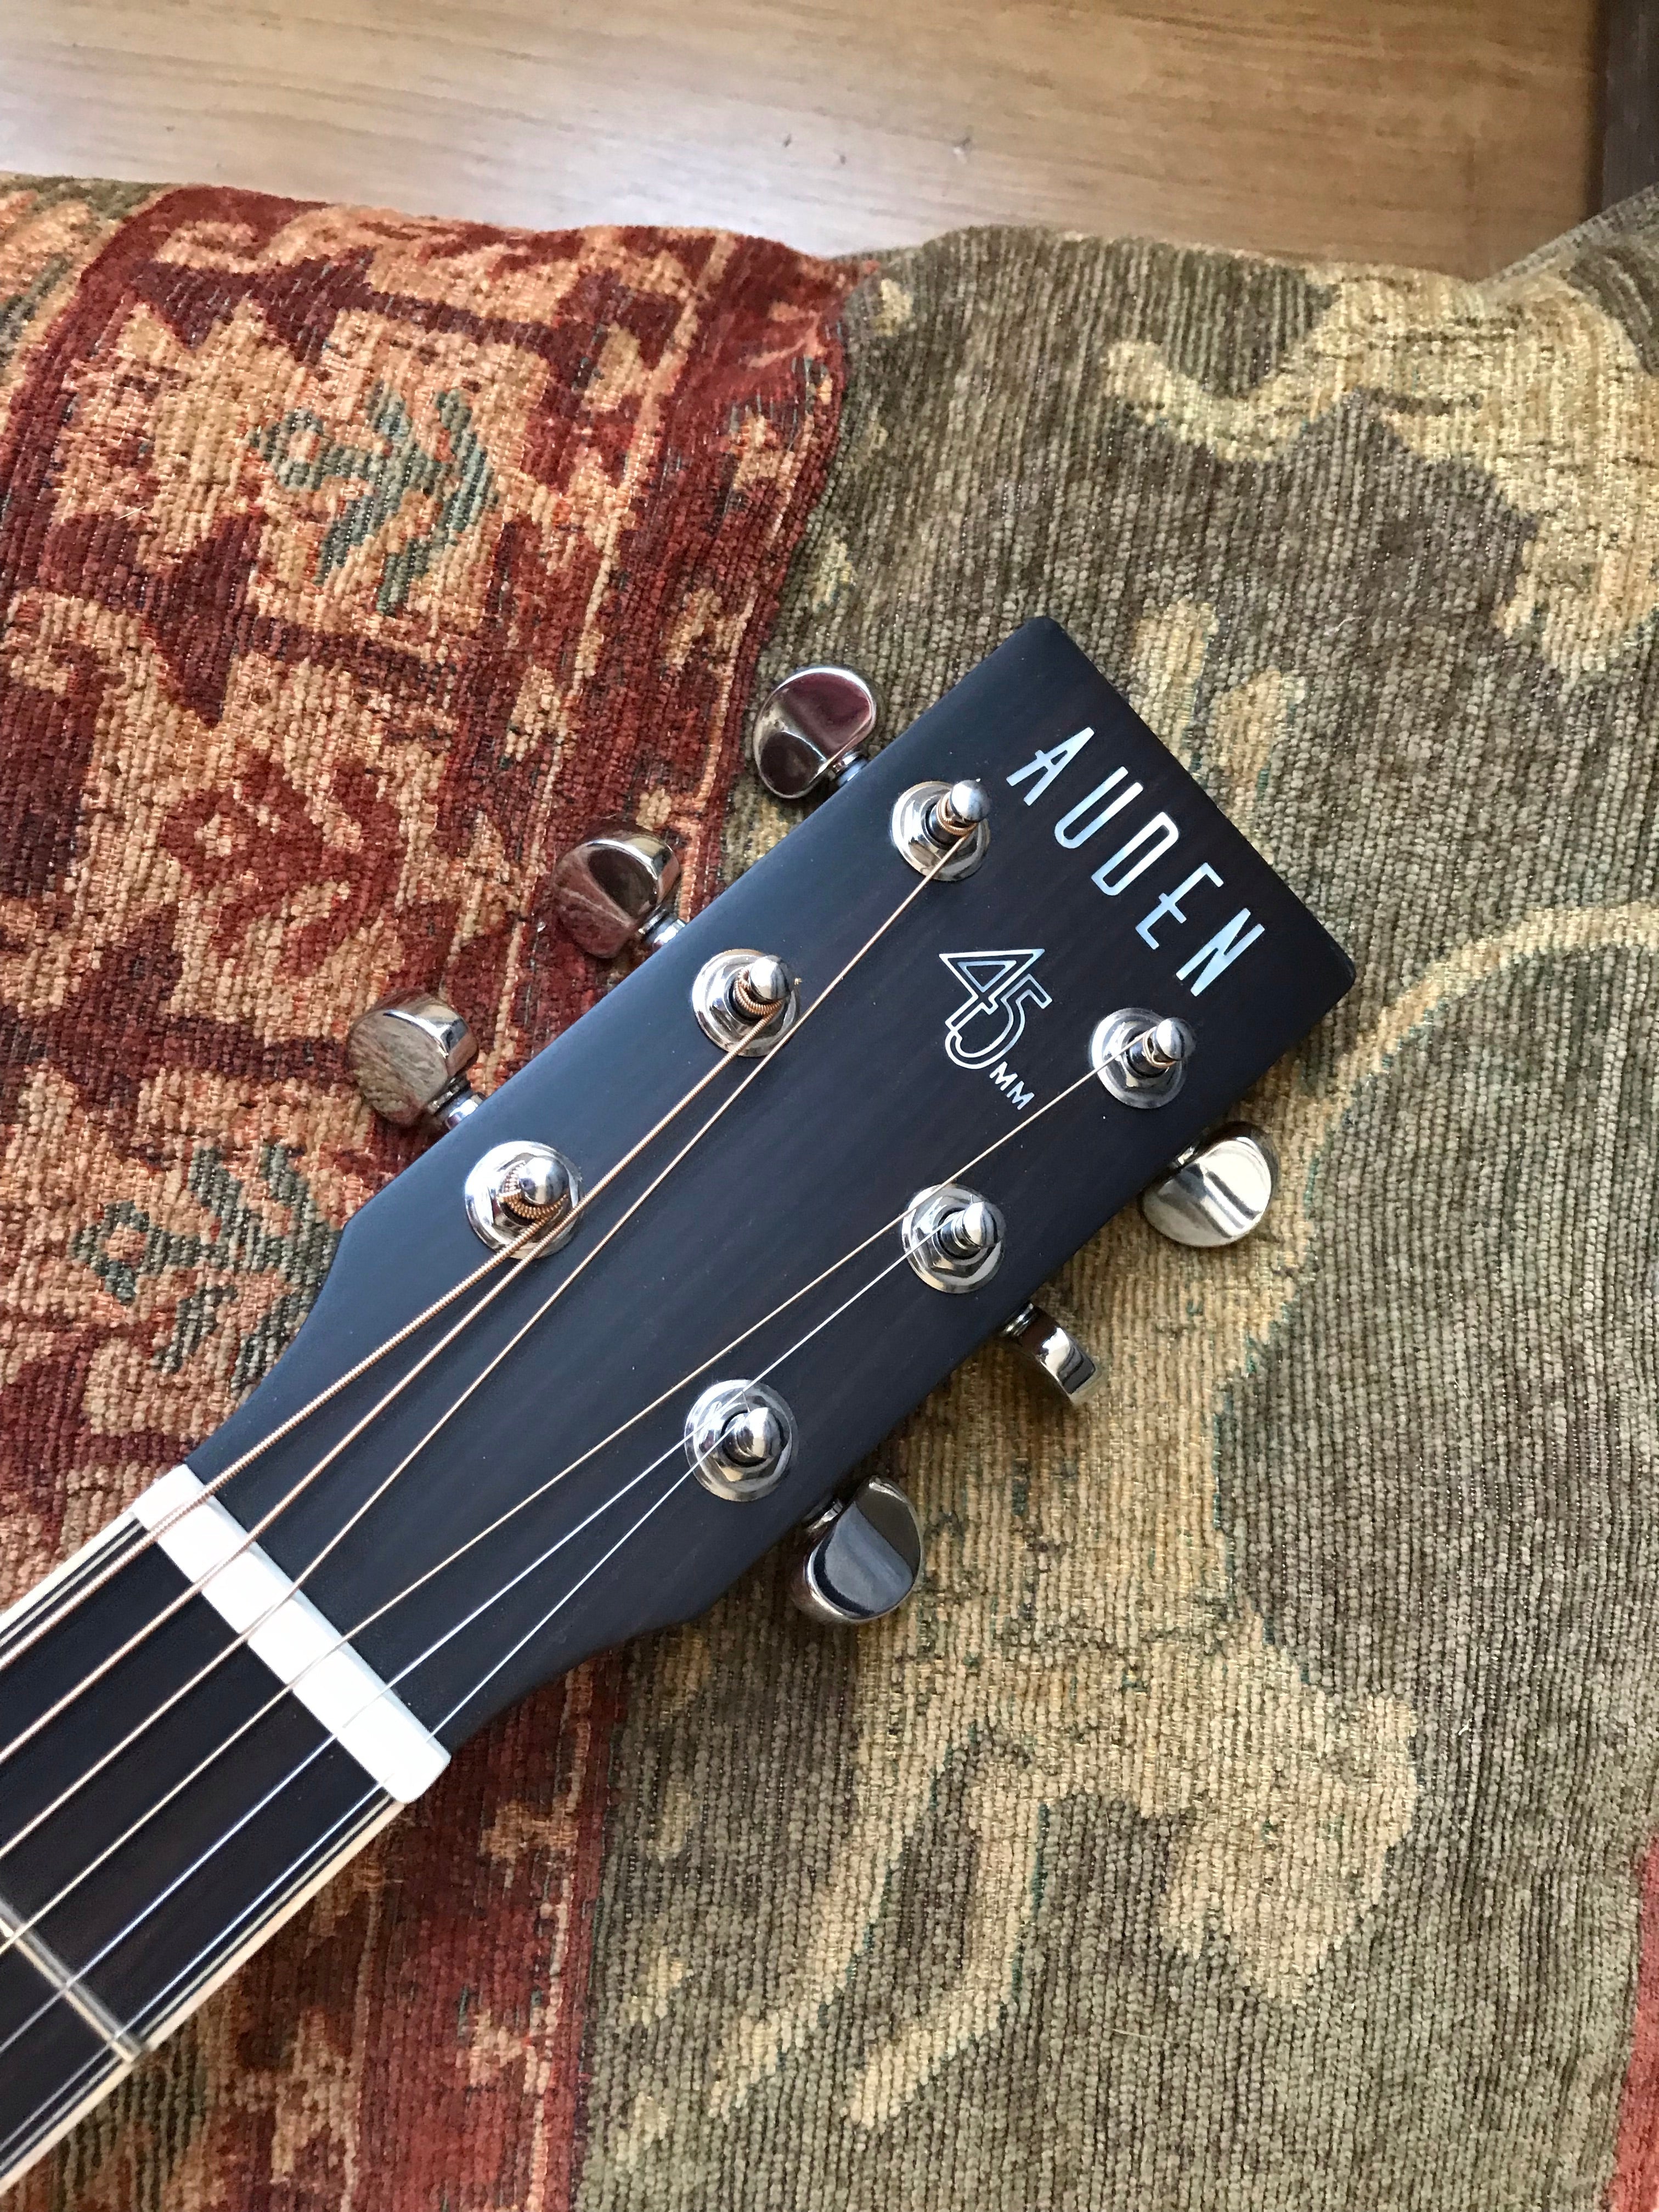 Auden Neo Chester Cutaway., Electro Acoustic Guitar for sale at Richards Guitars.